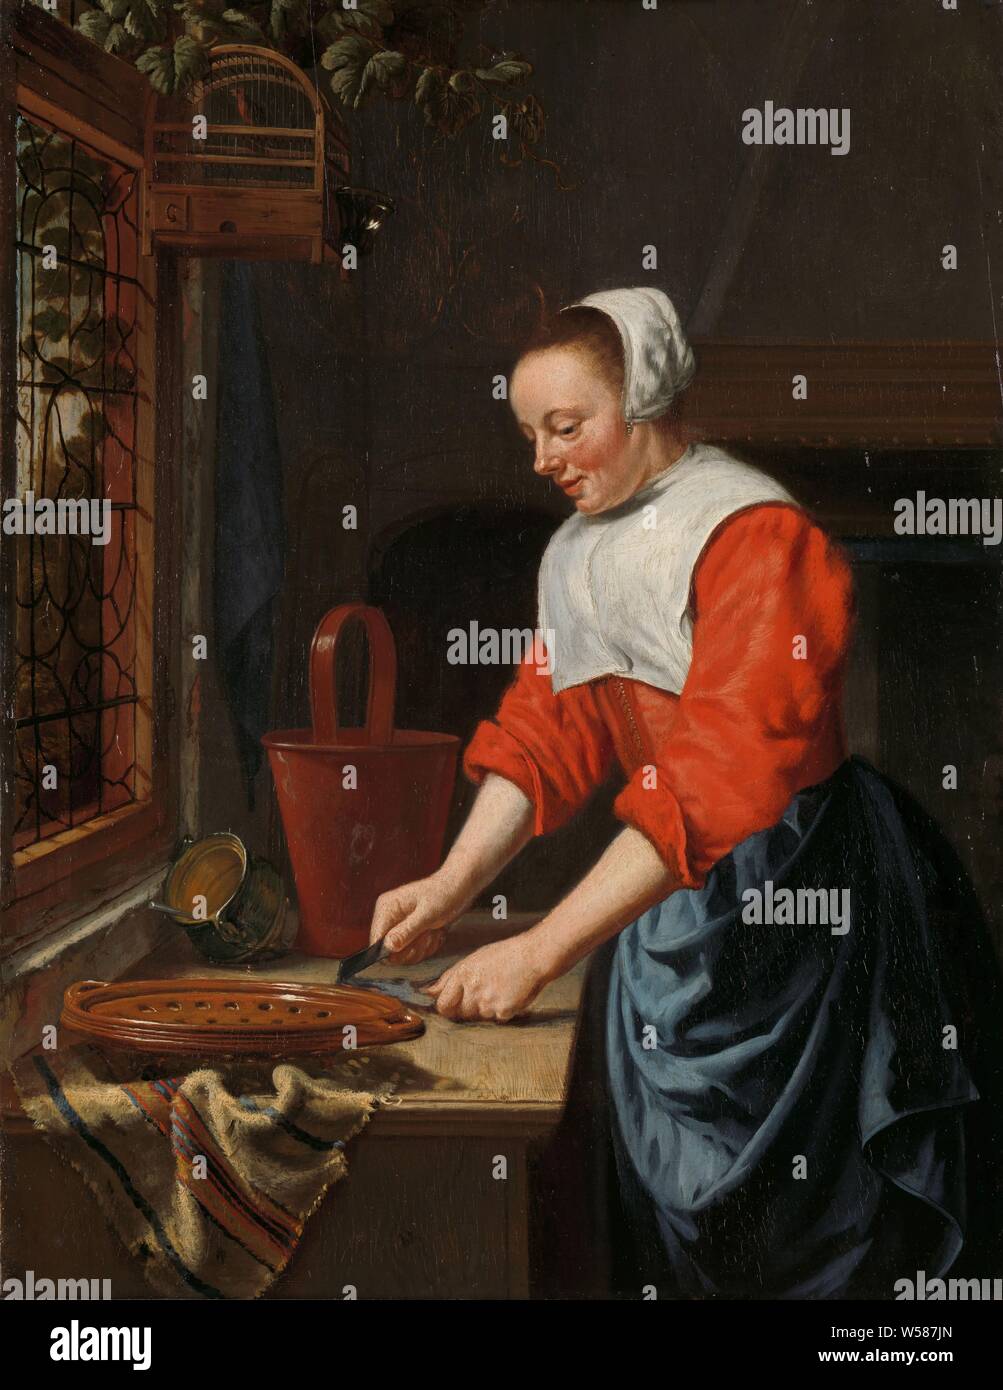 https://c8.alamy.com/comp/W587JN/the-servant-girl-the-maidservant-in-a-kitchen-a-maid-is-cutting-something-or-cleaning-it-on-a-table-by-a-window-on-the-table-are-a-colander-a-pot-and-a-bucket-above-the-window-is-a-bird-cage-kitchen-maid-kitchen-servant-kitchen-interior-willem-van-odekercken-attributed-to-1631-1677-panel-oil-paint-paint-h-31-cm-w-24-cm-d-6-cm-W587JN.jpg